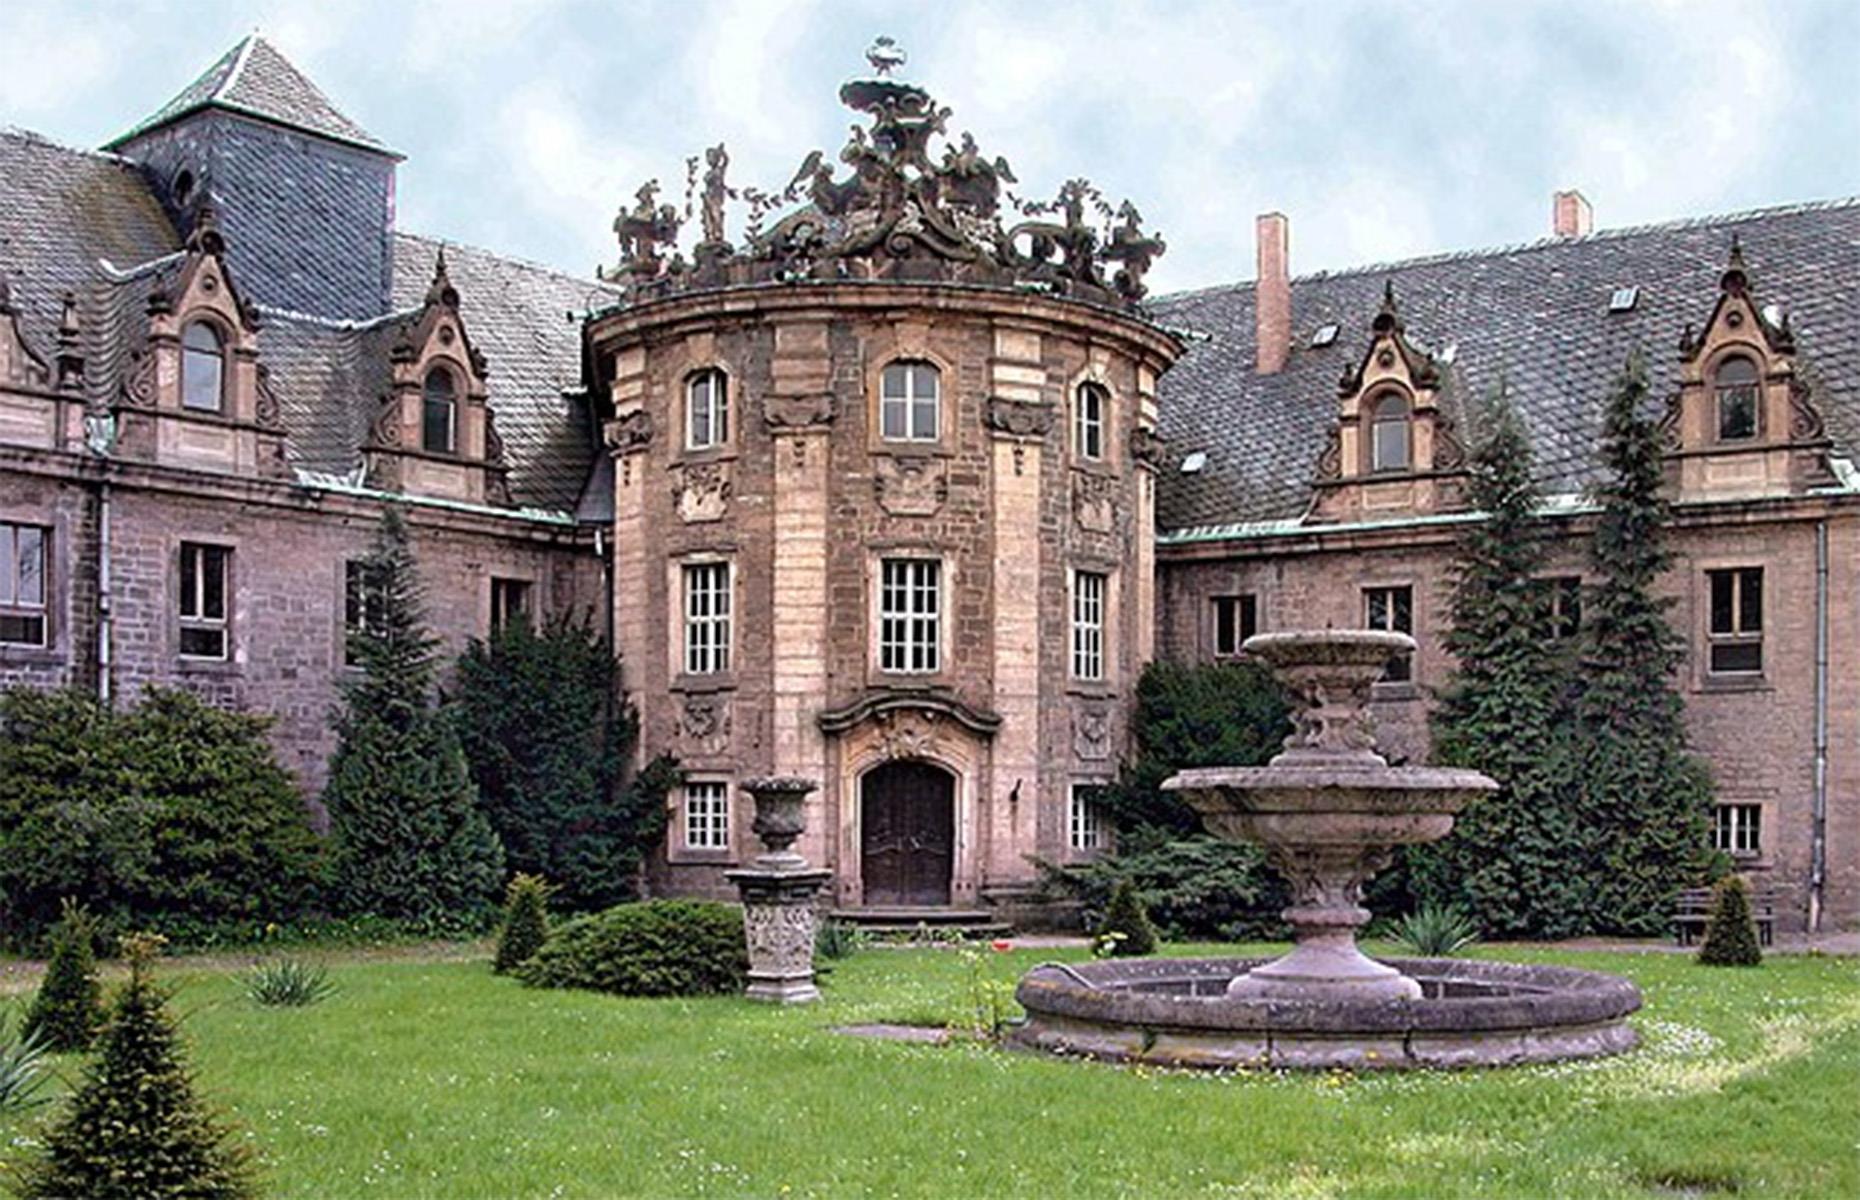 <p>Reportedly founded more than 1,000 years ago, the castle has had many uses over the decades, including a nunnery and a sanctuary for refugees during the Second World War.</p>  <p>A landmark of the region, Vitzenburg Castle now sits abandoned and empty despite reportedly acquiring a new owner in <a href="https://www.arcanumurbex.de/photos/civilian-objects/movie-castle/">2004</a>.</p>